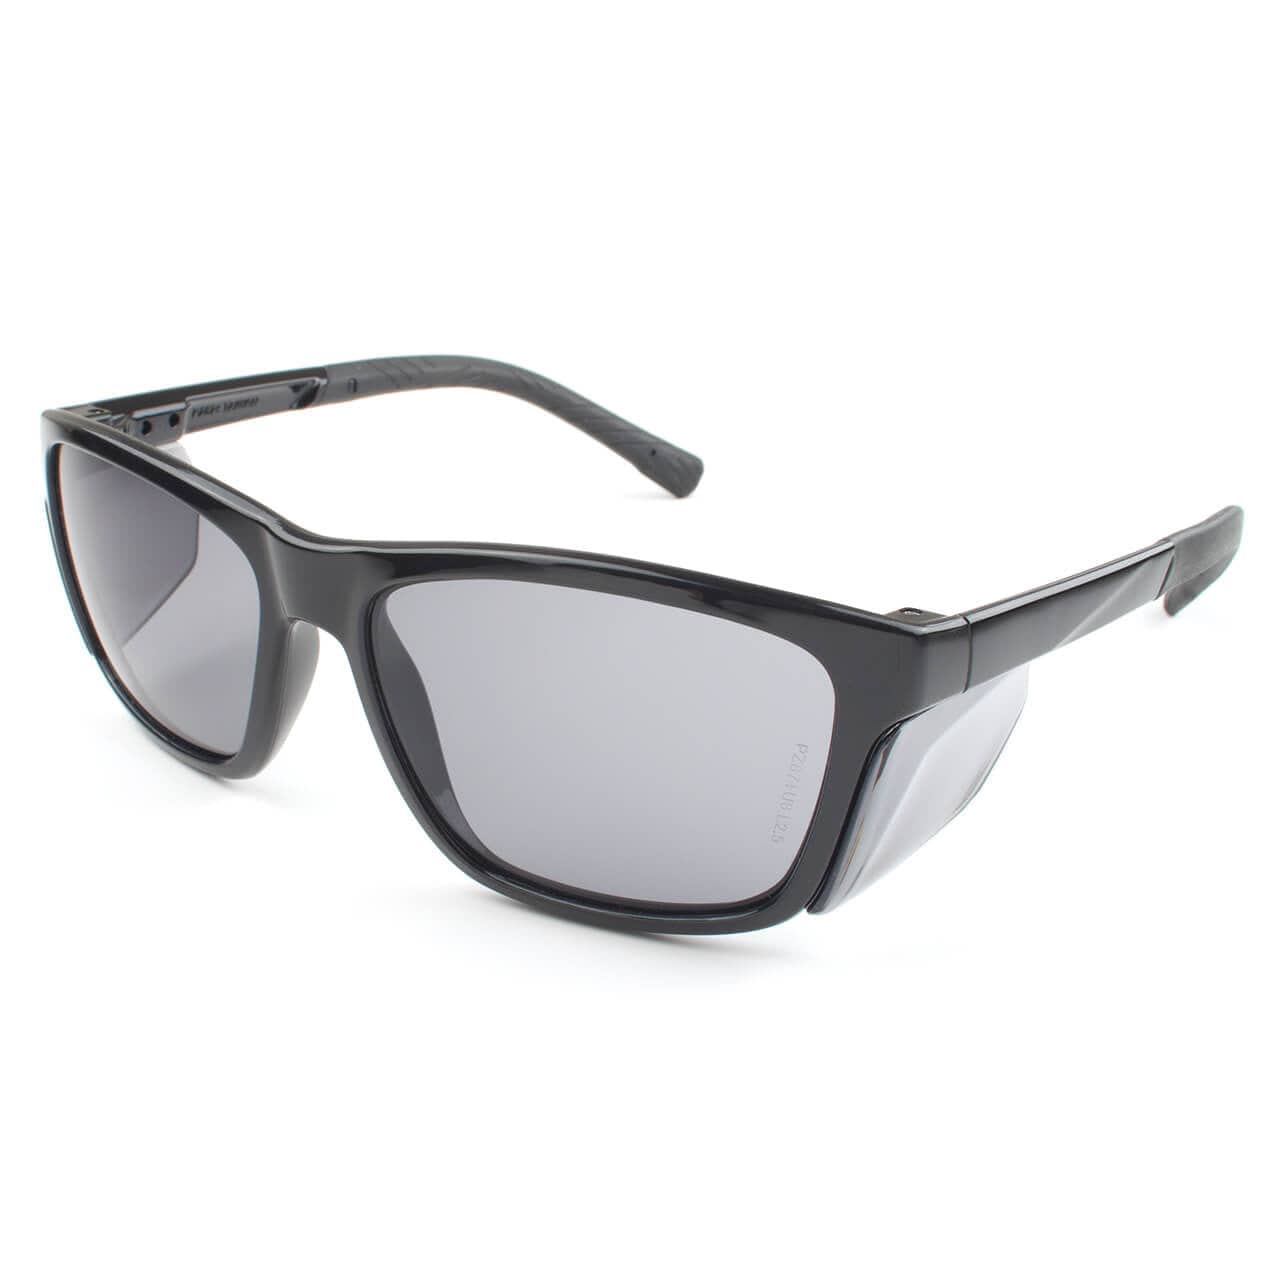 Metel M40 Safety Glasses with Black Frame and Gray Lenses